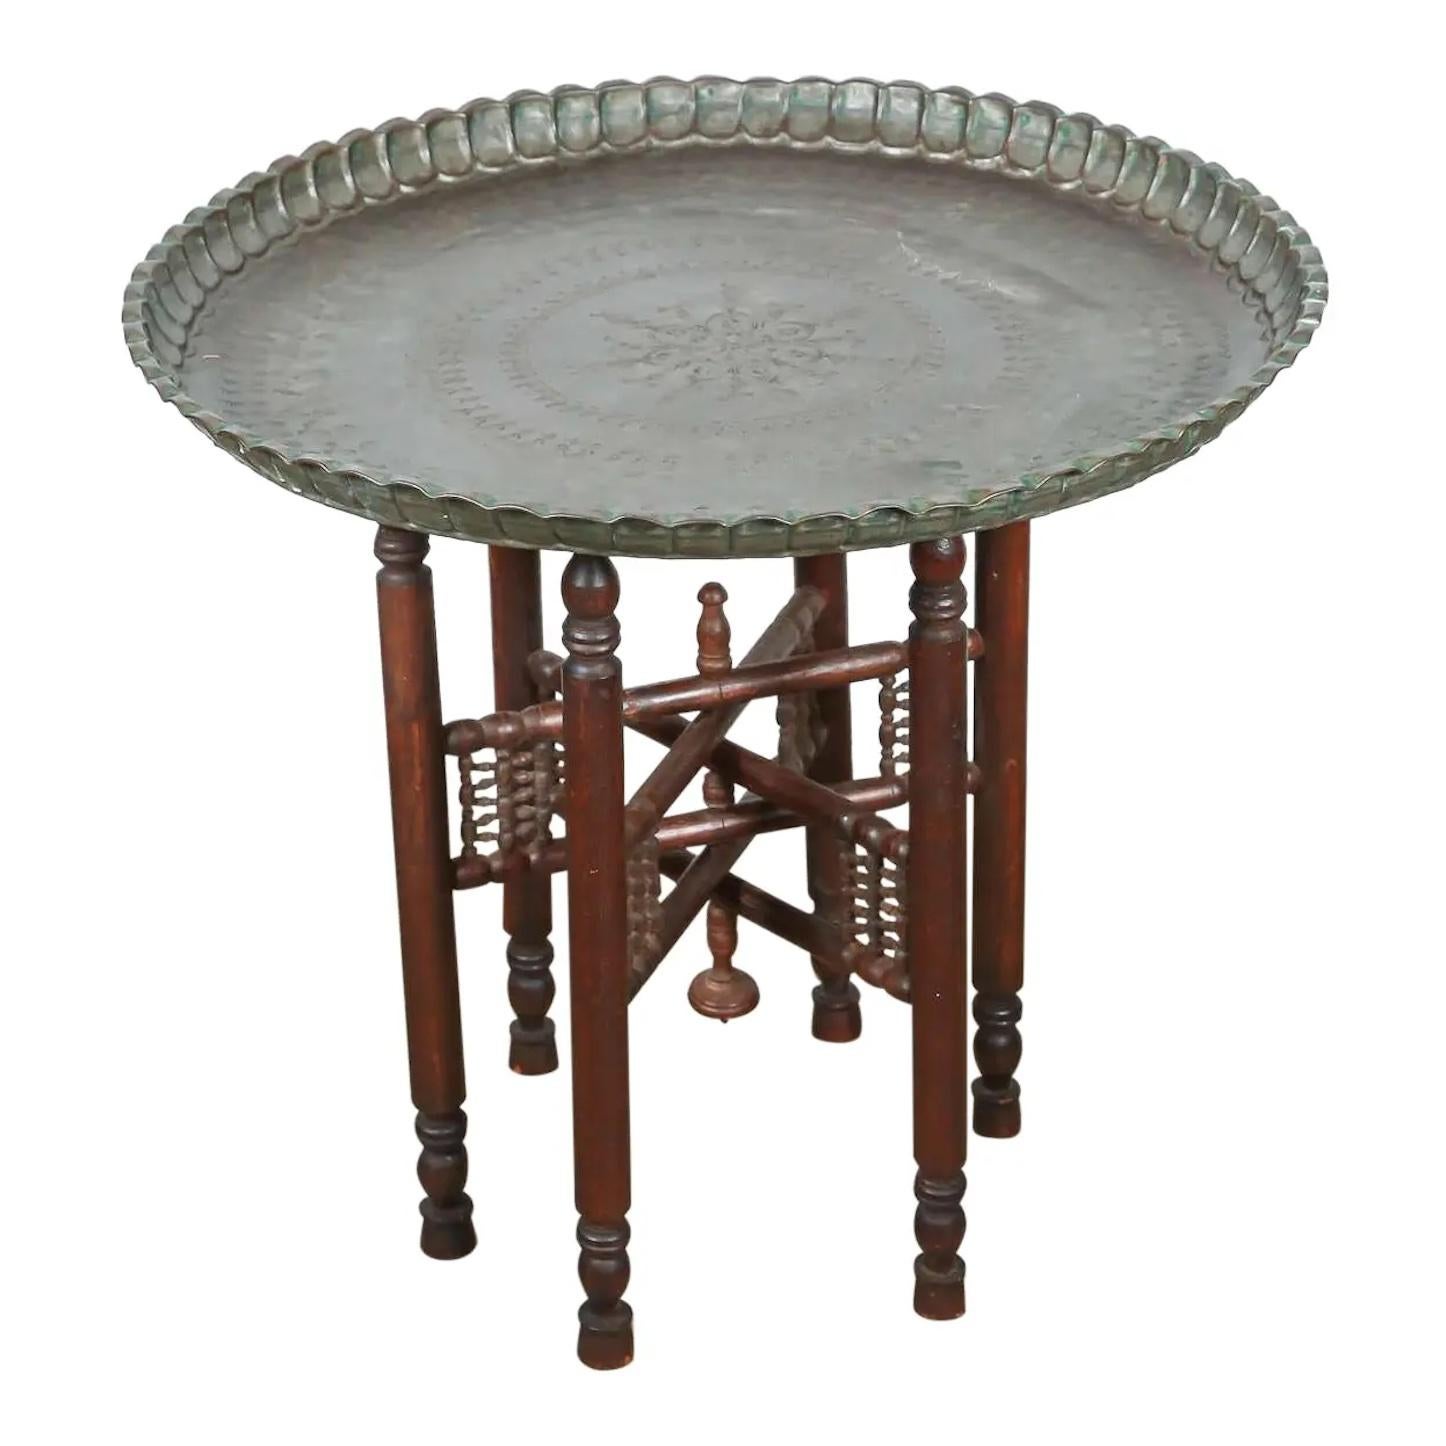 Turkish tin copper tray table on wooden folding stand 
Turkish Persian Mameluke style tinned copper tray table. 
Very nice unusual Asian dark bronzed color tray on folding wooden stand nicely carved with musharabie fret work. 
The tinned copper